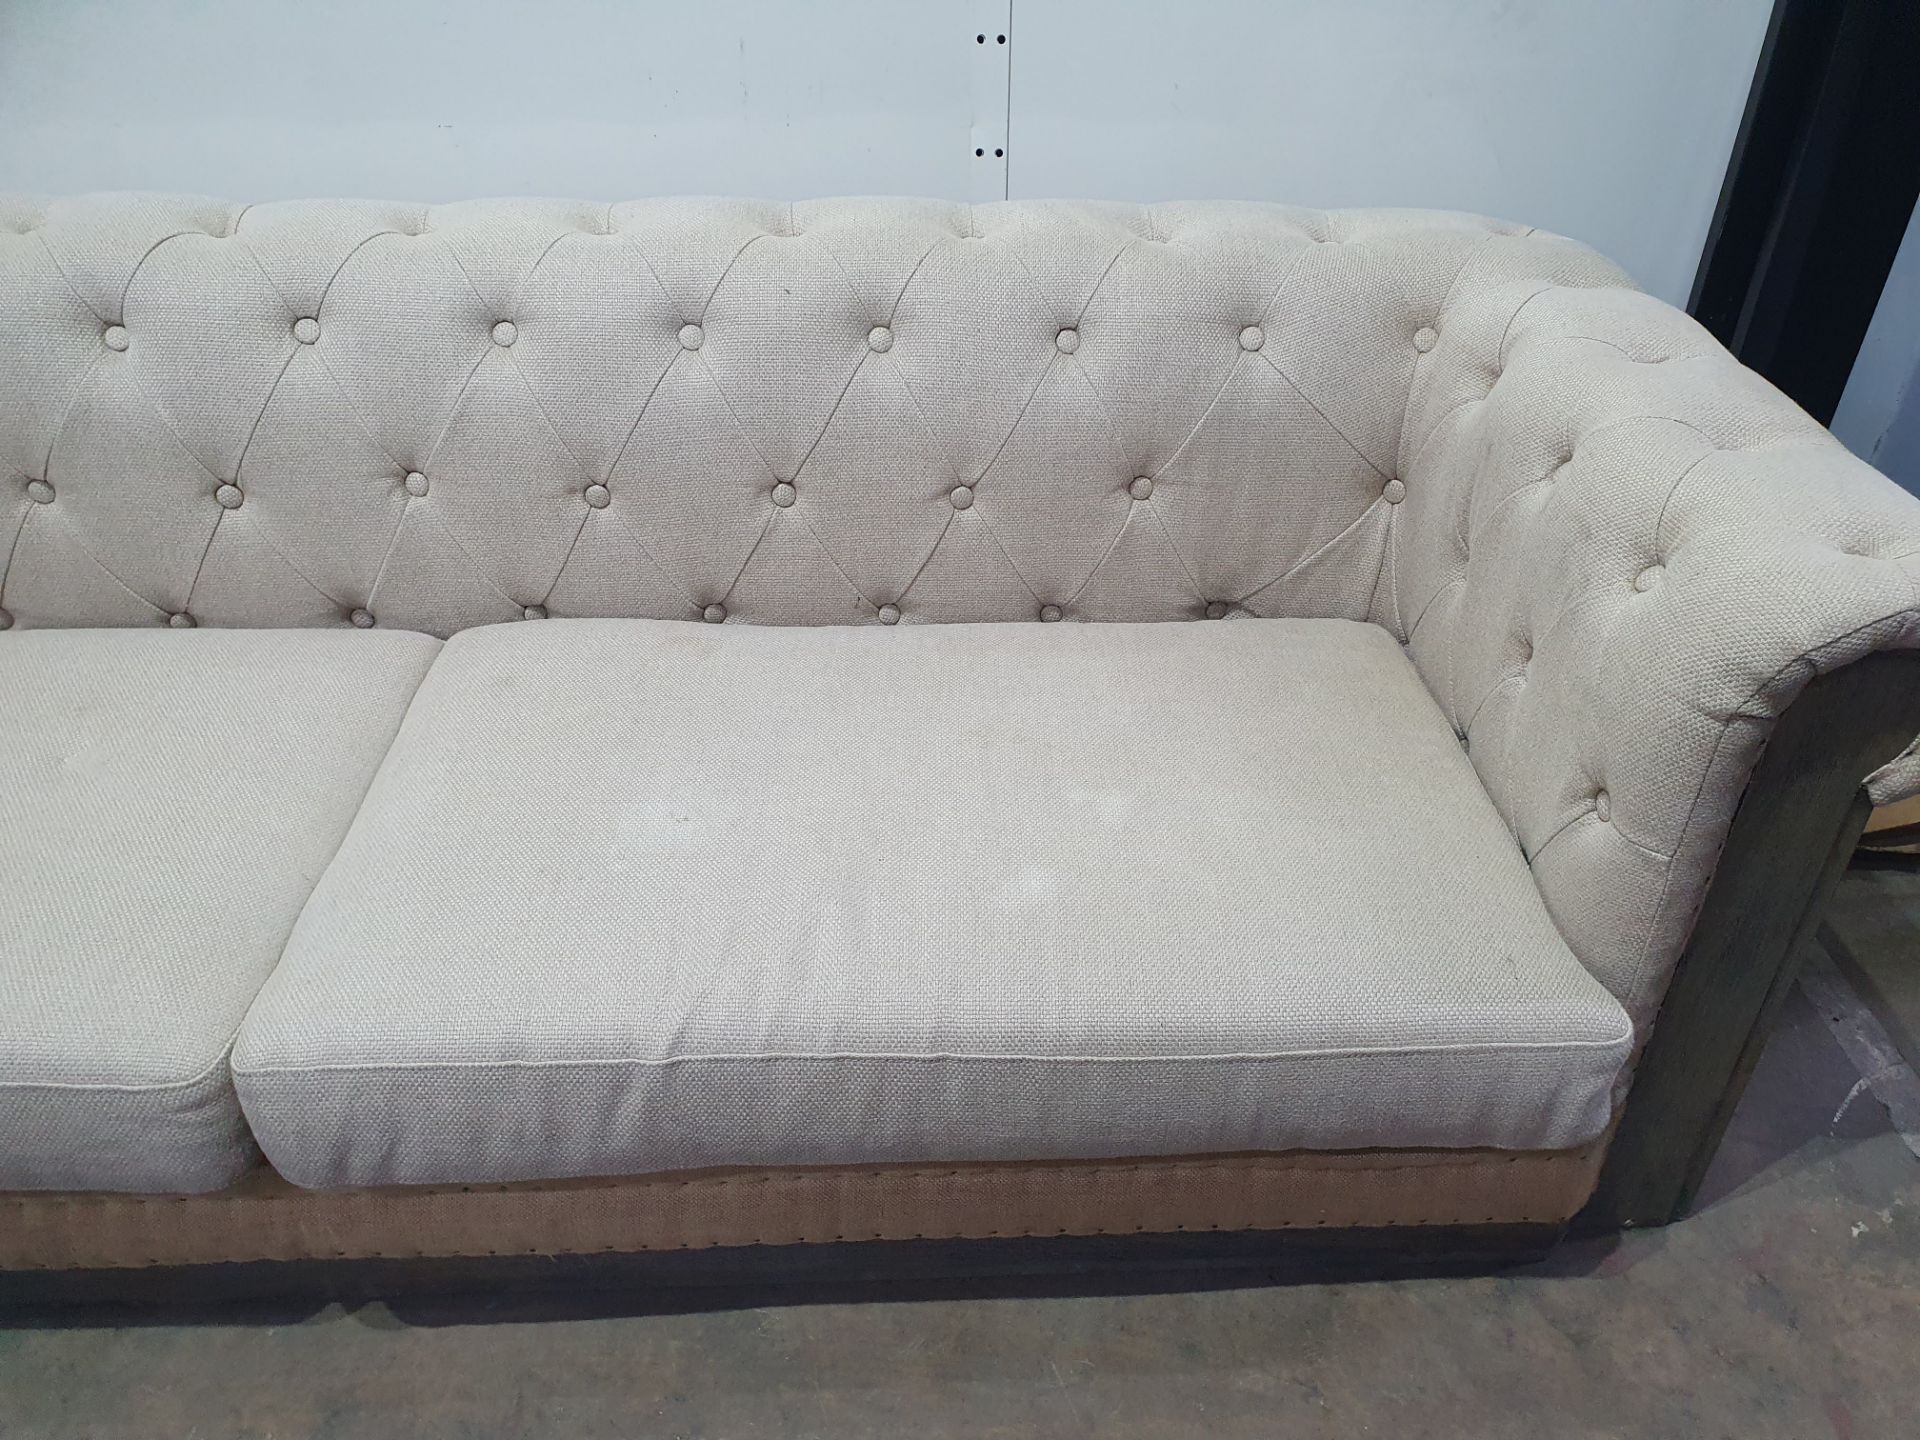 Beige 3 Seater Couch - Image 3 of 6